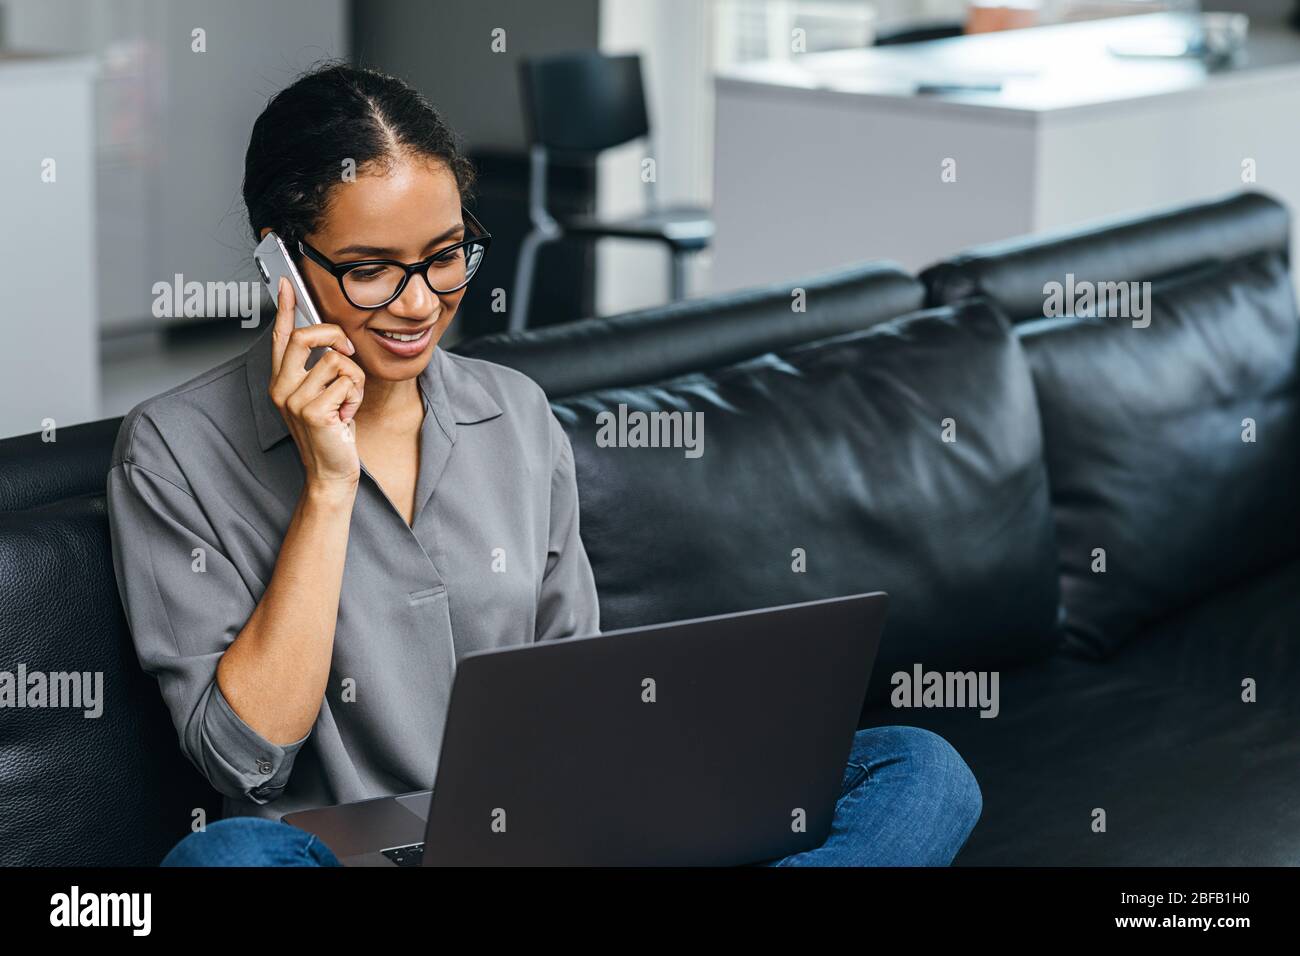 Beautiful woman using a smartphone having phone call from her apartment. Businesswoman enjoying conversation sitting on a couch. Stock Photo